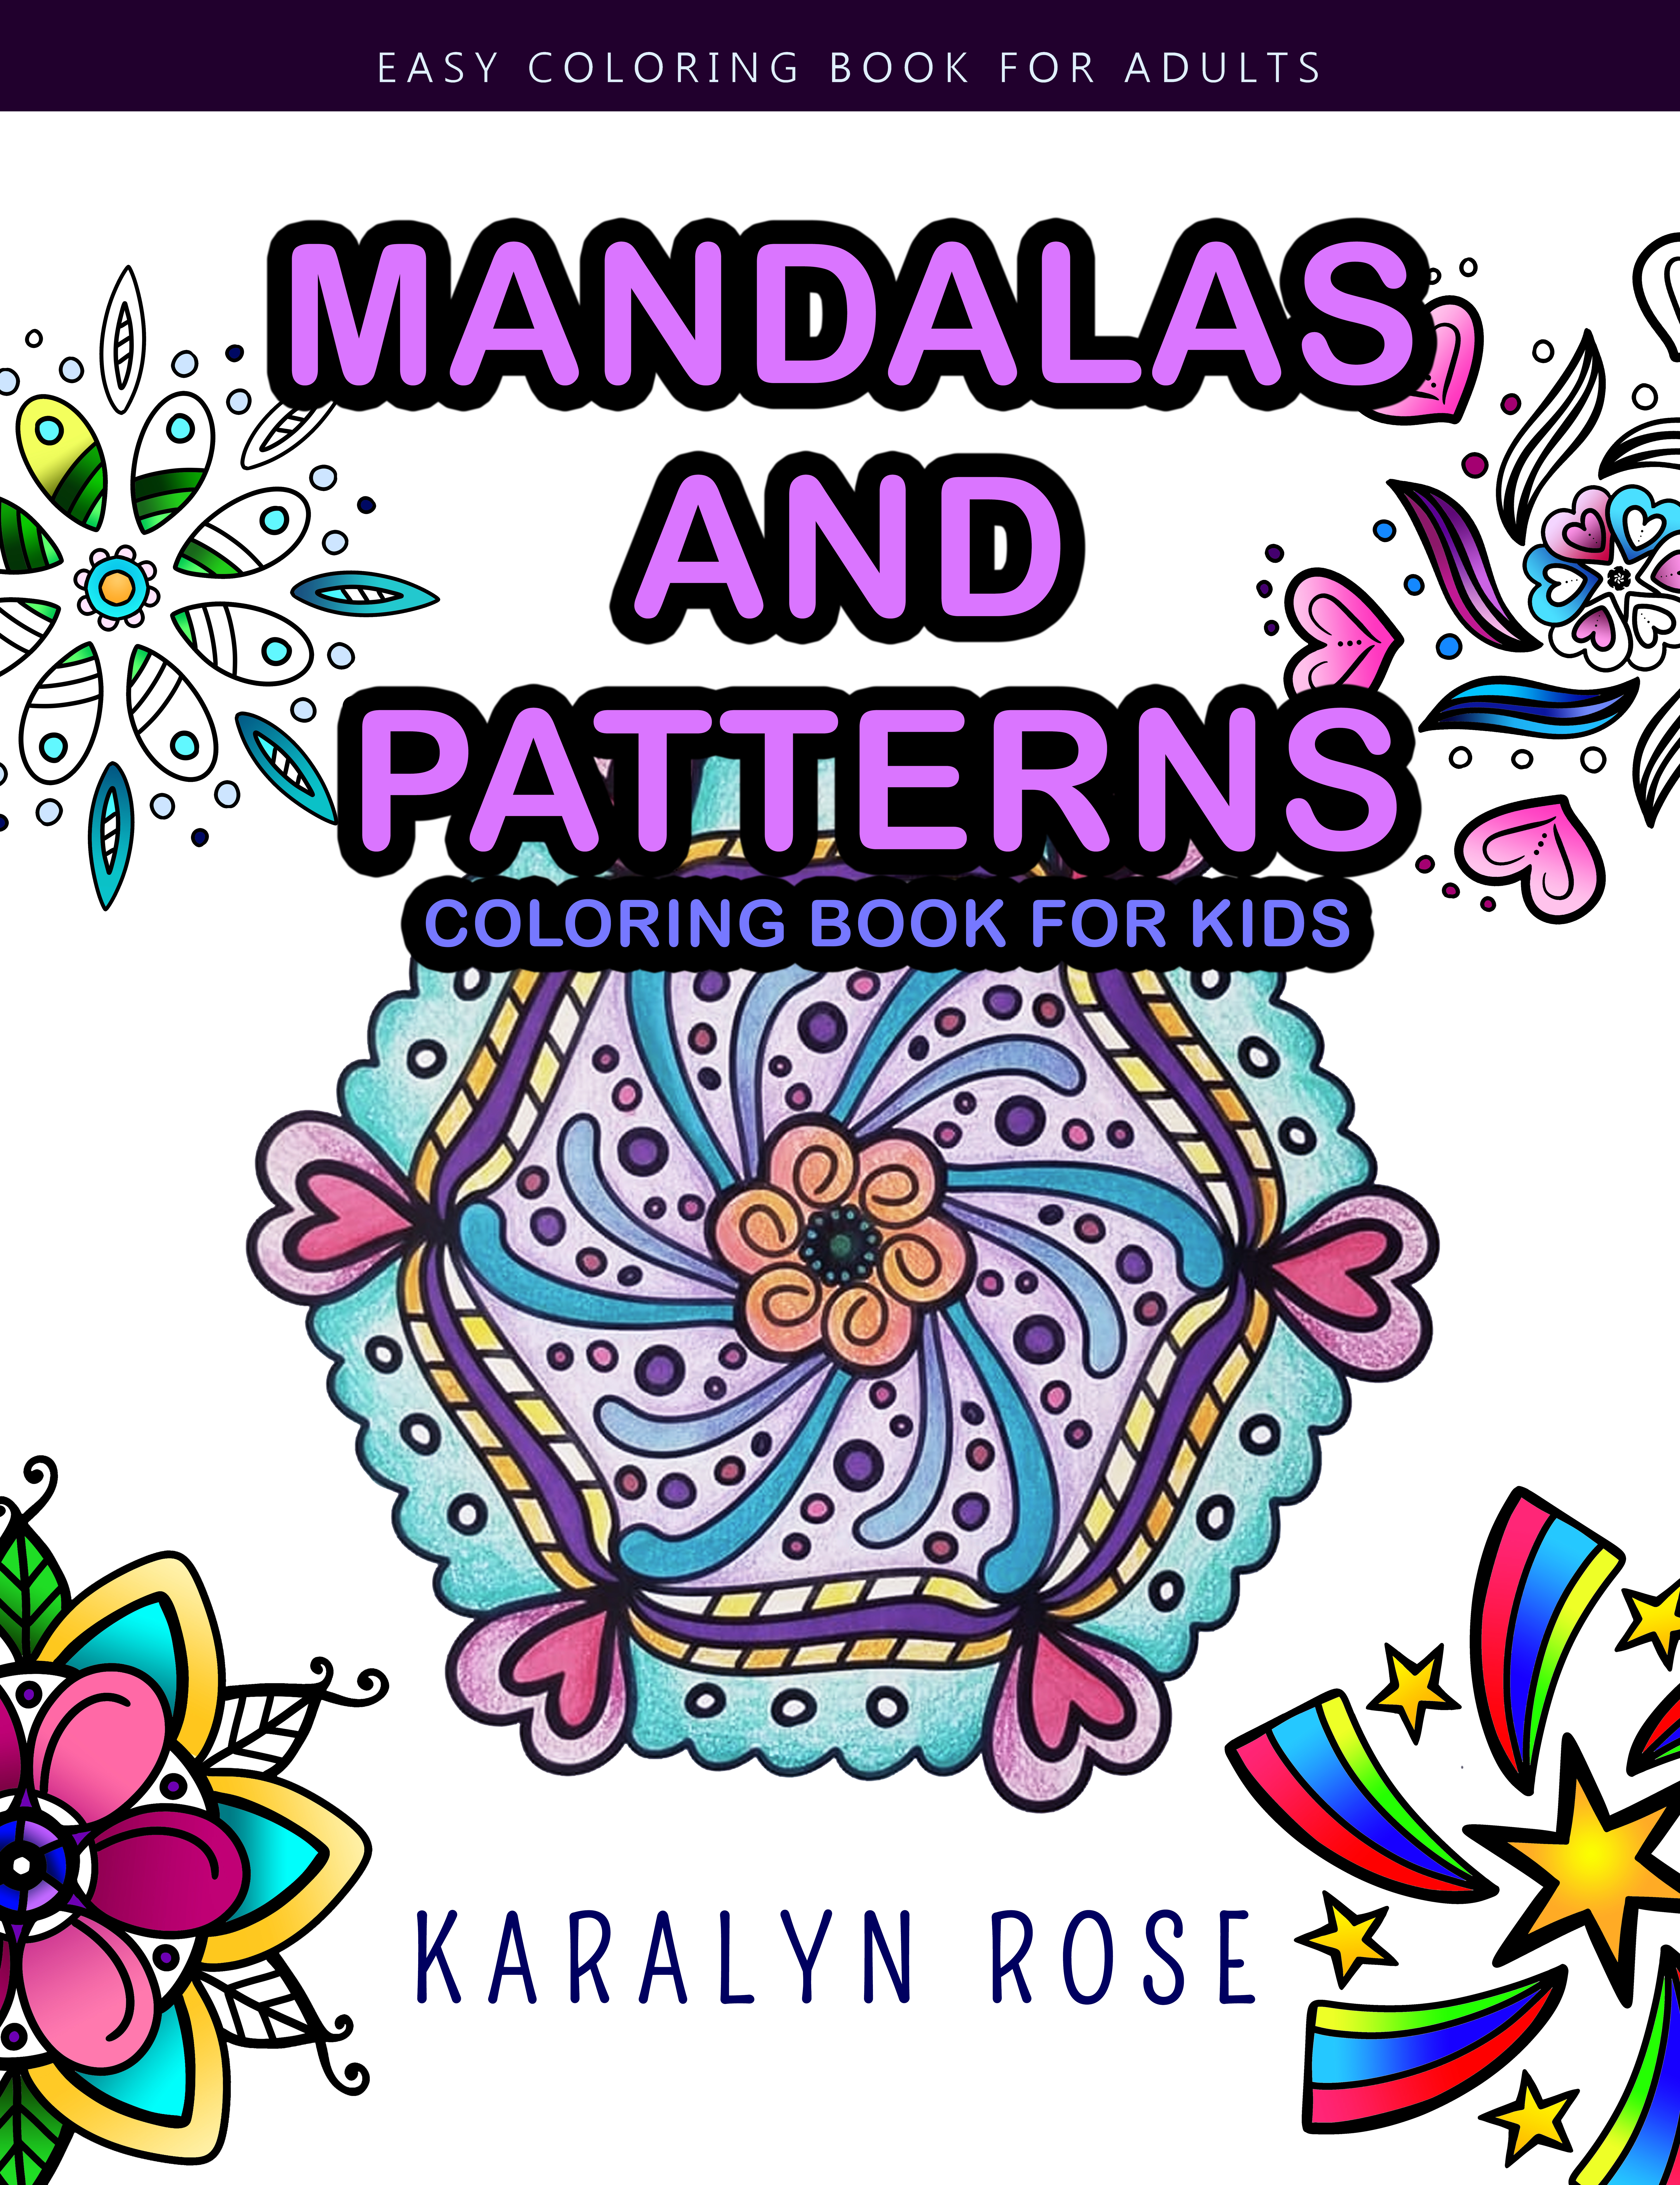 Mandalas and Patterns Coloring Book for Kids